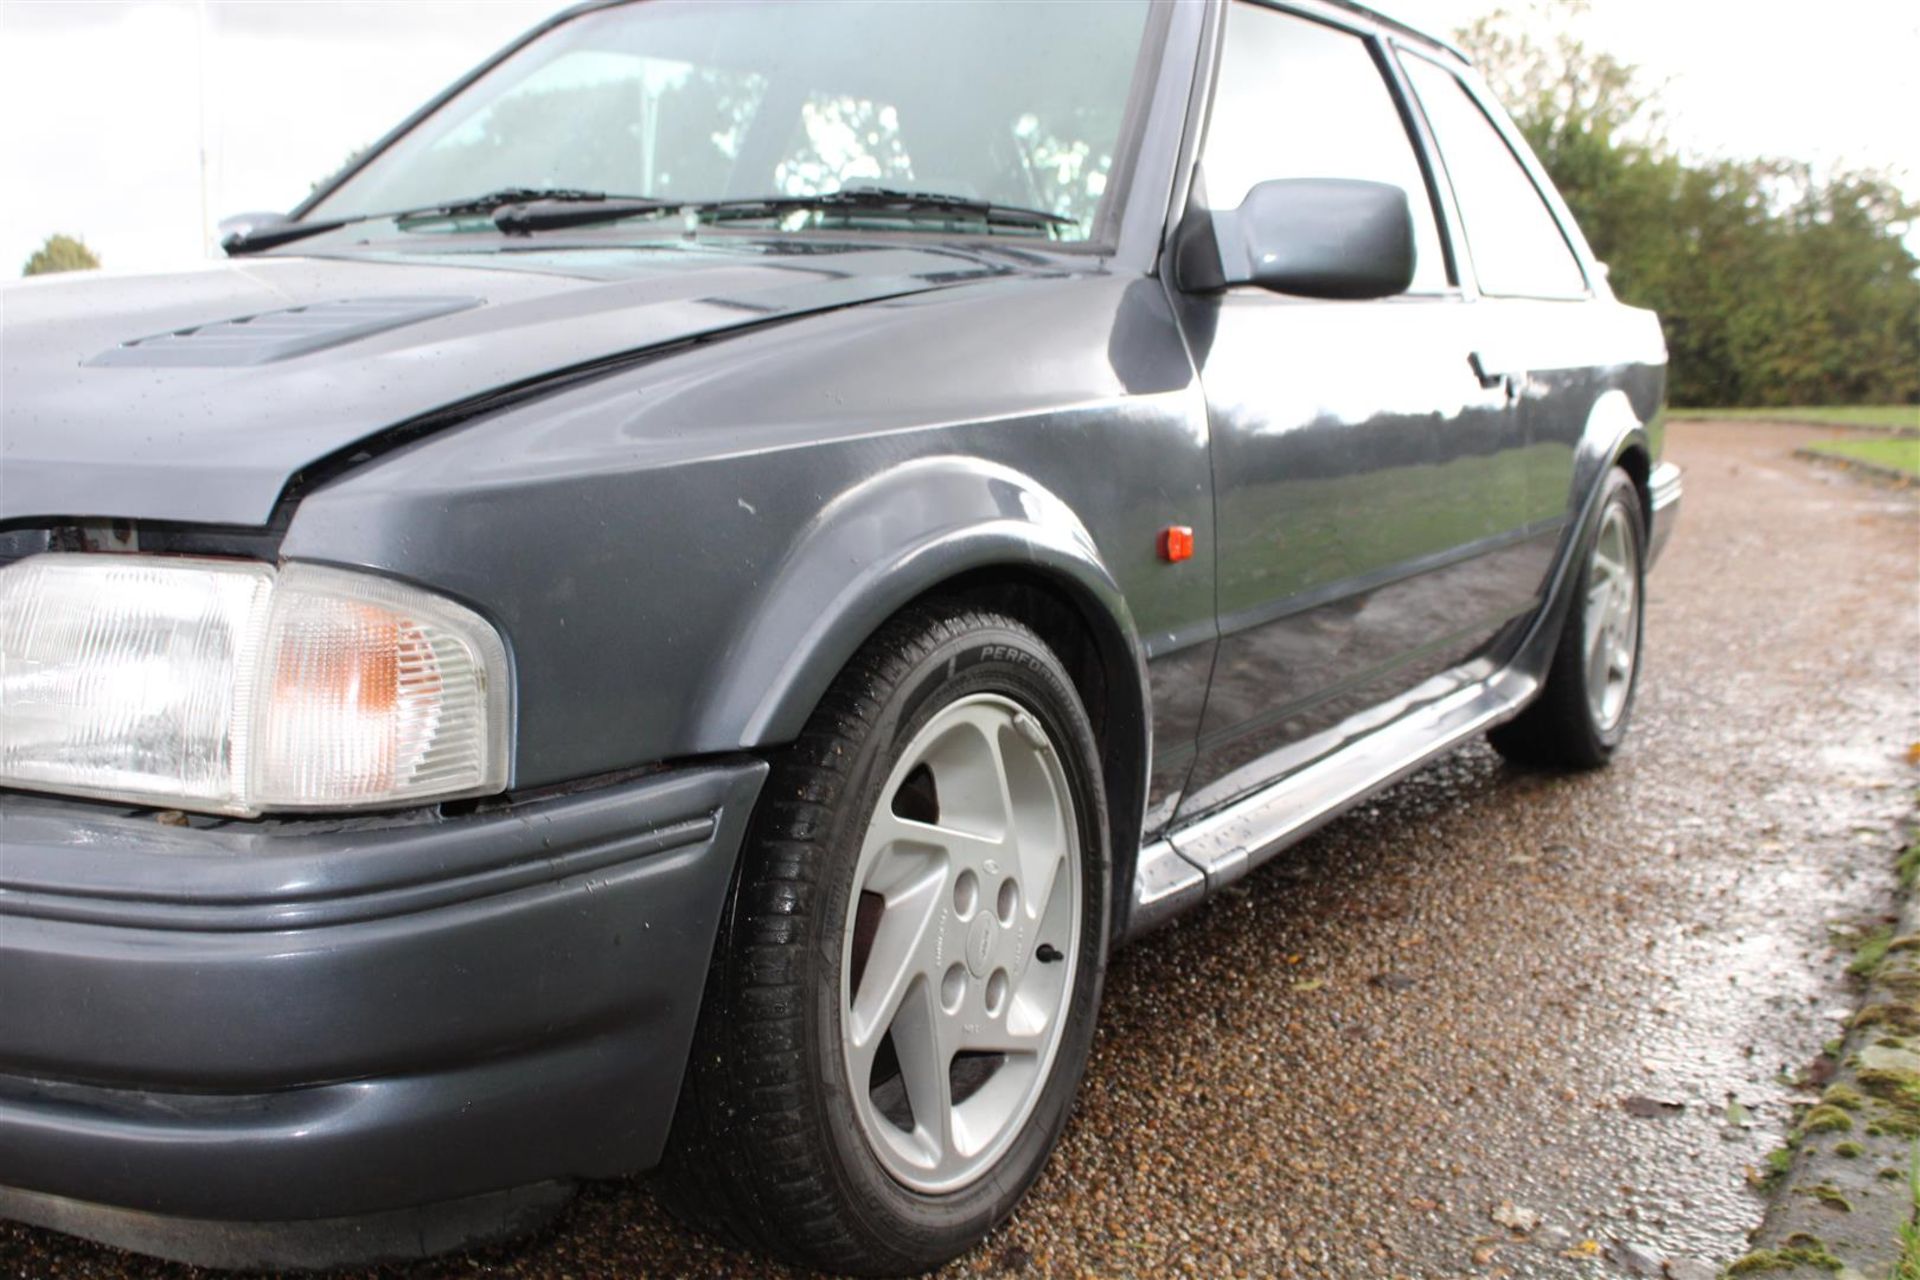 1988 Ford Escort RS Turbo - Image 8 of 21